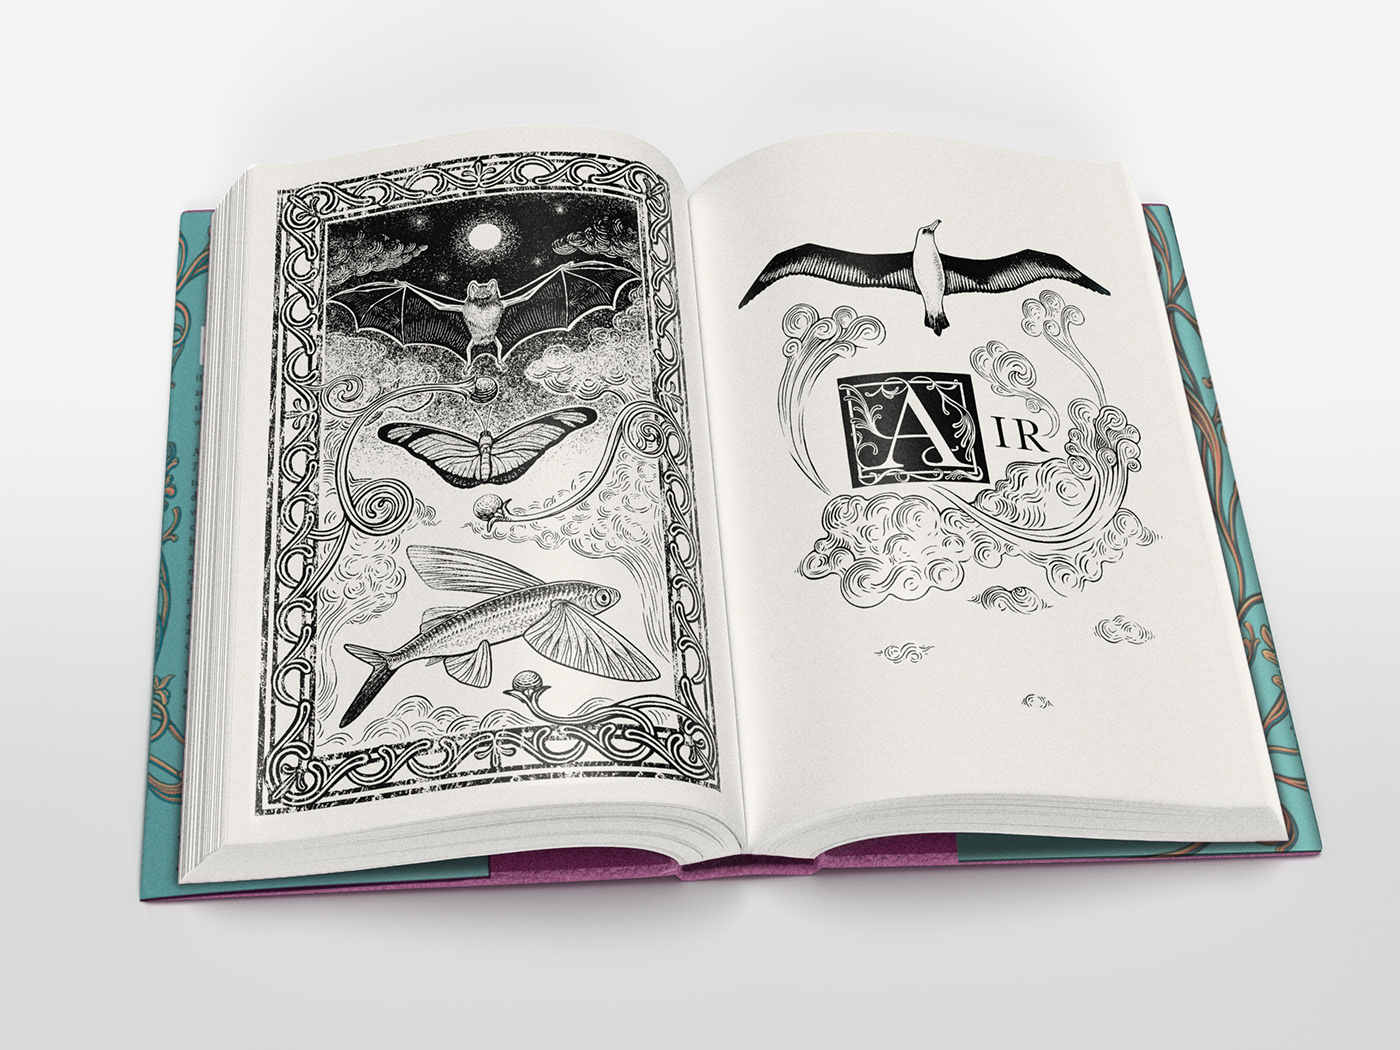 animal Bestiary book cover book design endpapers medieval ornate science scientific illustration zoology